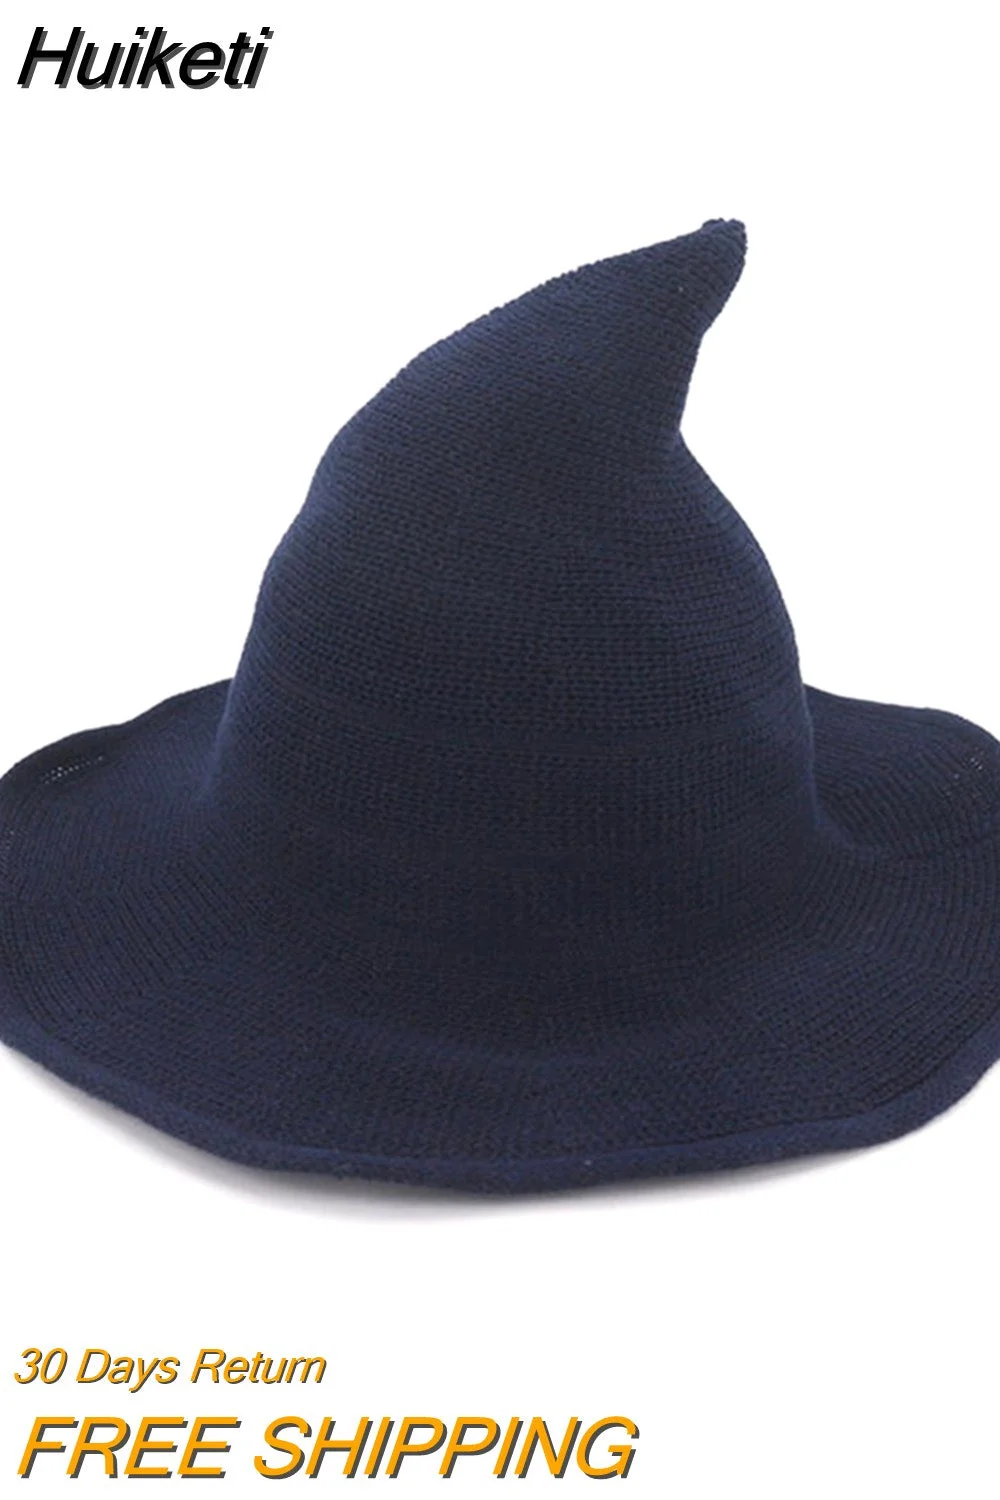 Huiketi Costumes Accessories Women Modern Witch Hat Pointed Caps Made From High Quality Wool Party Club Witches Hats 6 Colors